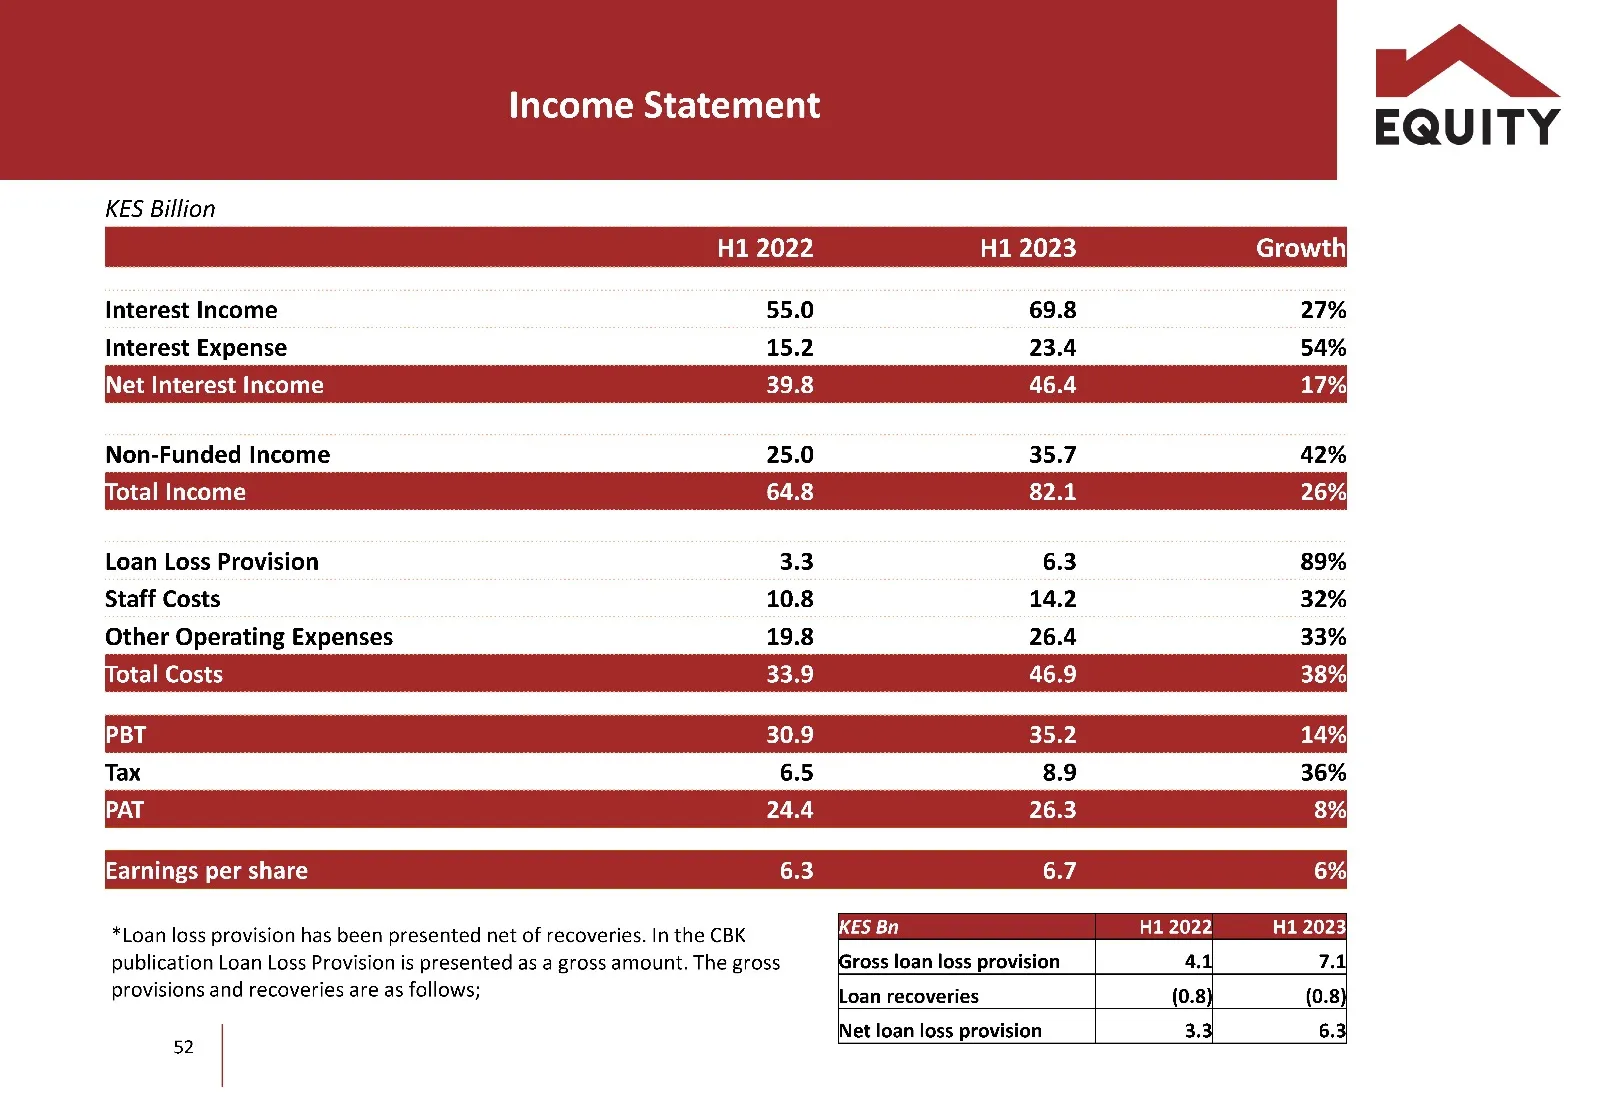 Profit Before Tax grew by 14% to Kshs 35.2B from Kshs 30.9B with subsidiaries contributing 45%. Profit After Tax grew by 8%  to Kshs 26.3B from Kshs 24.4B.